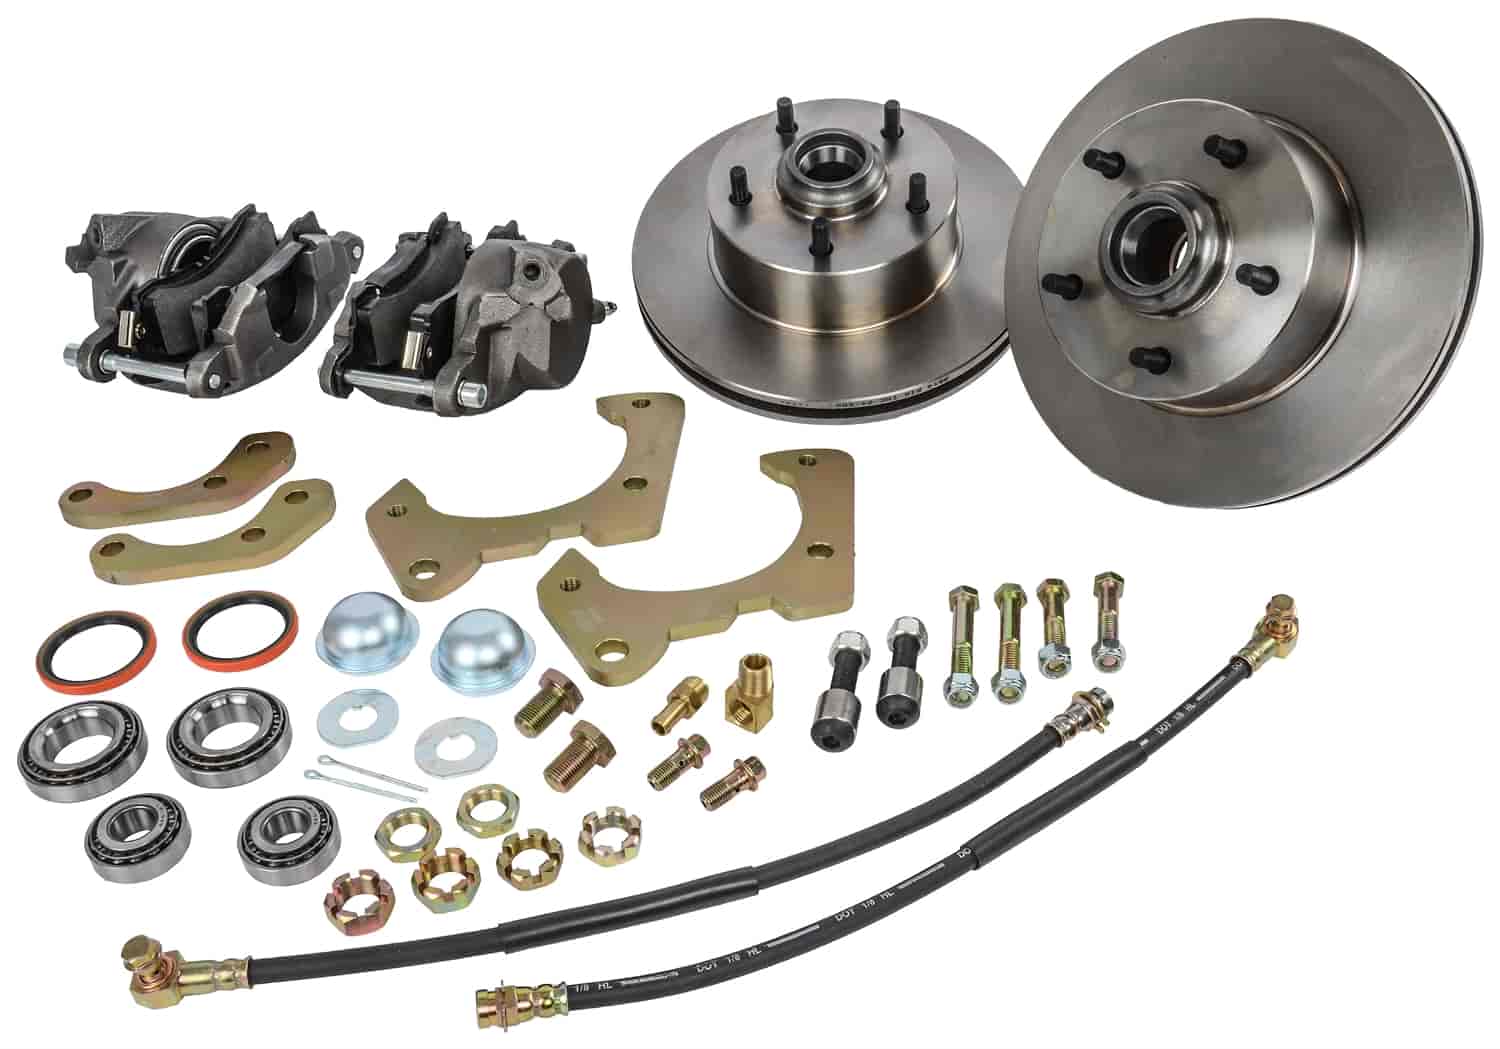 Front Disc Brake Conversion Kit for 1959-1964 Chevrolet Bel Air, Biscayne, Impala [Standard Kit w/Raw Calipers]